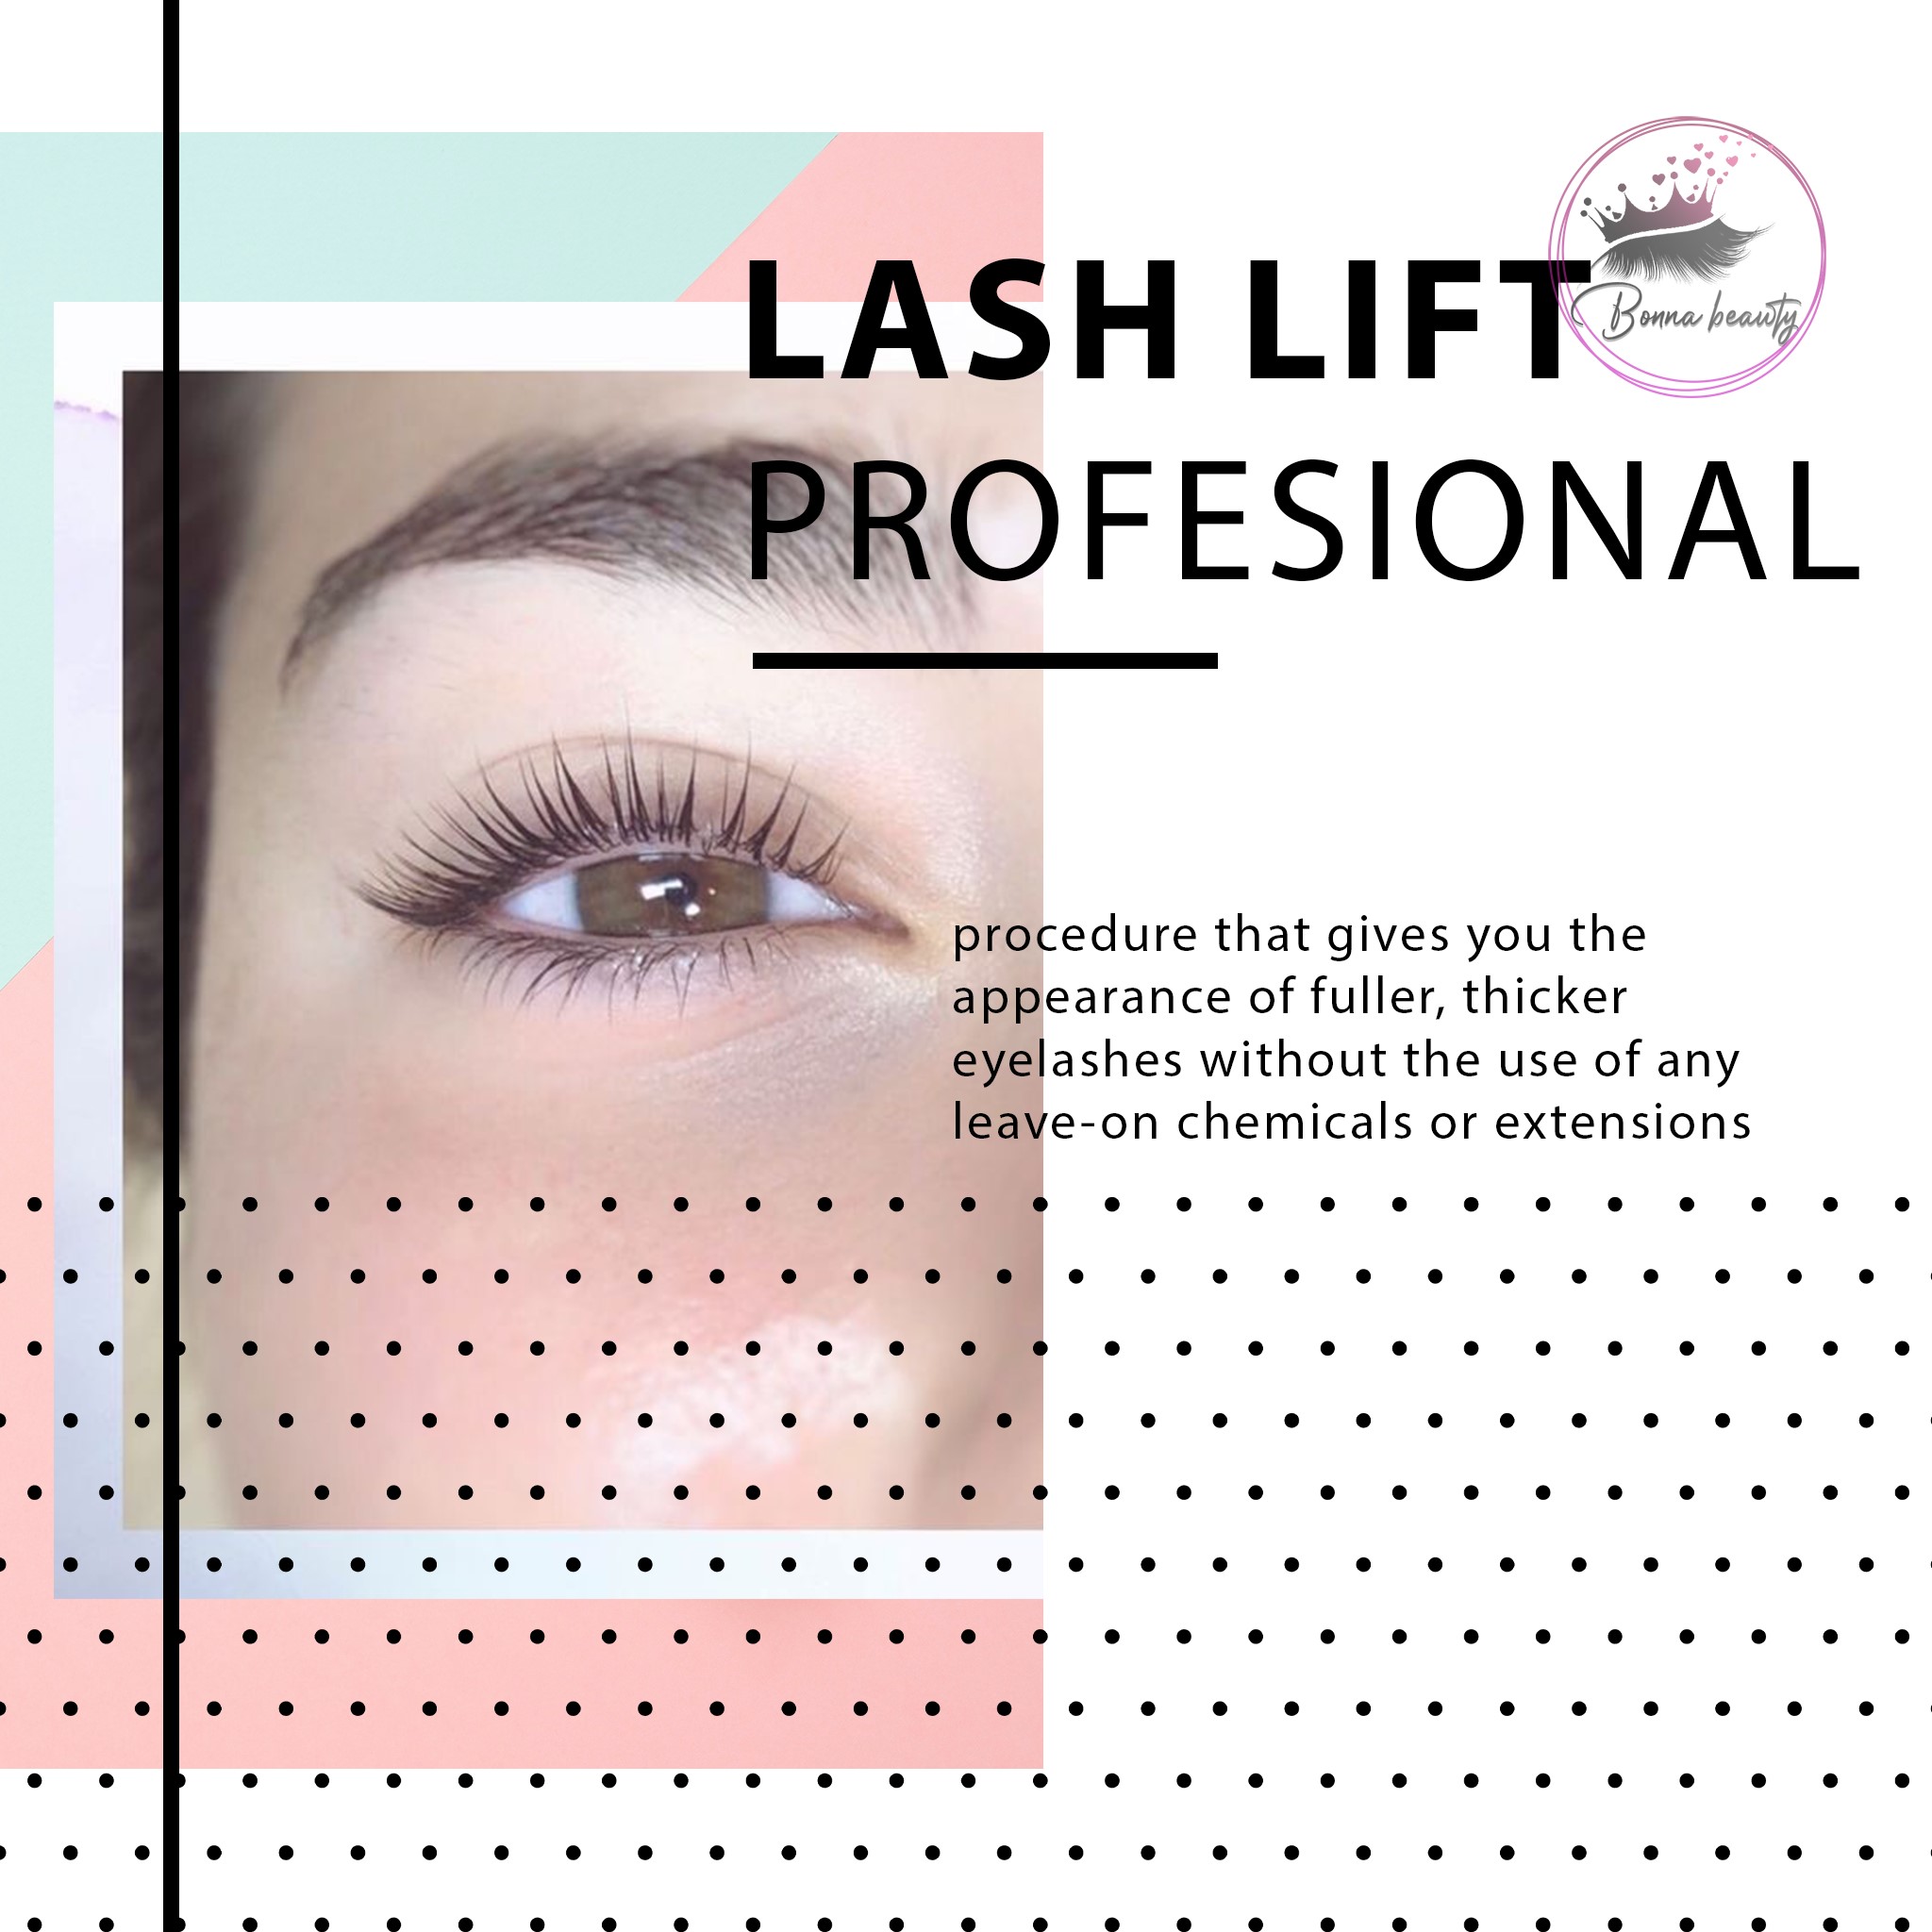 Lash Lift For 5 Different Eye Shapes: Tips And Techniques - Bonna Beauty